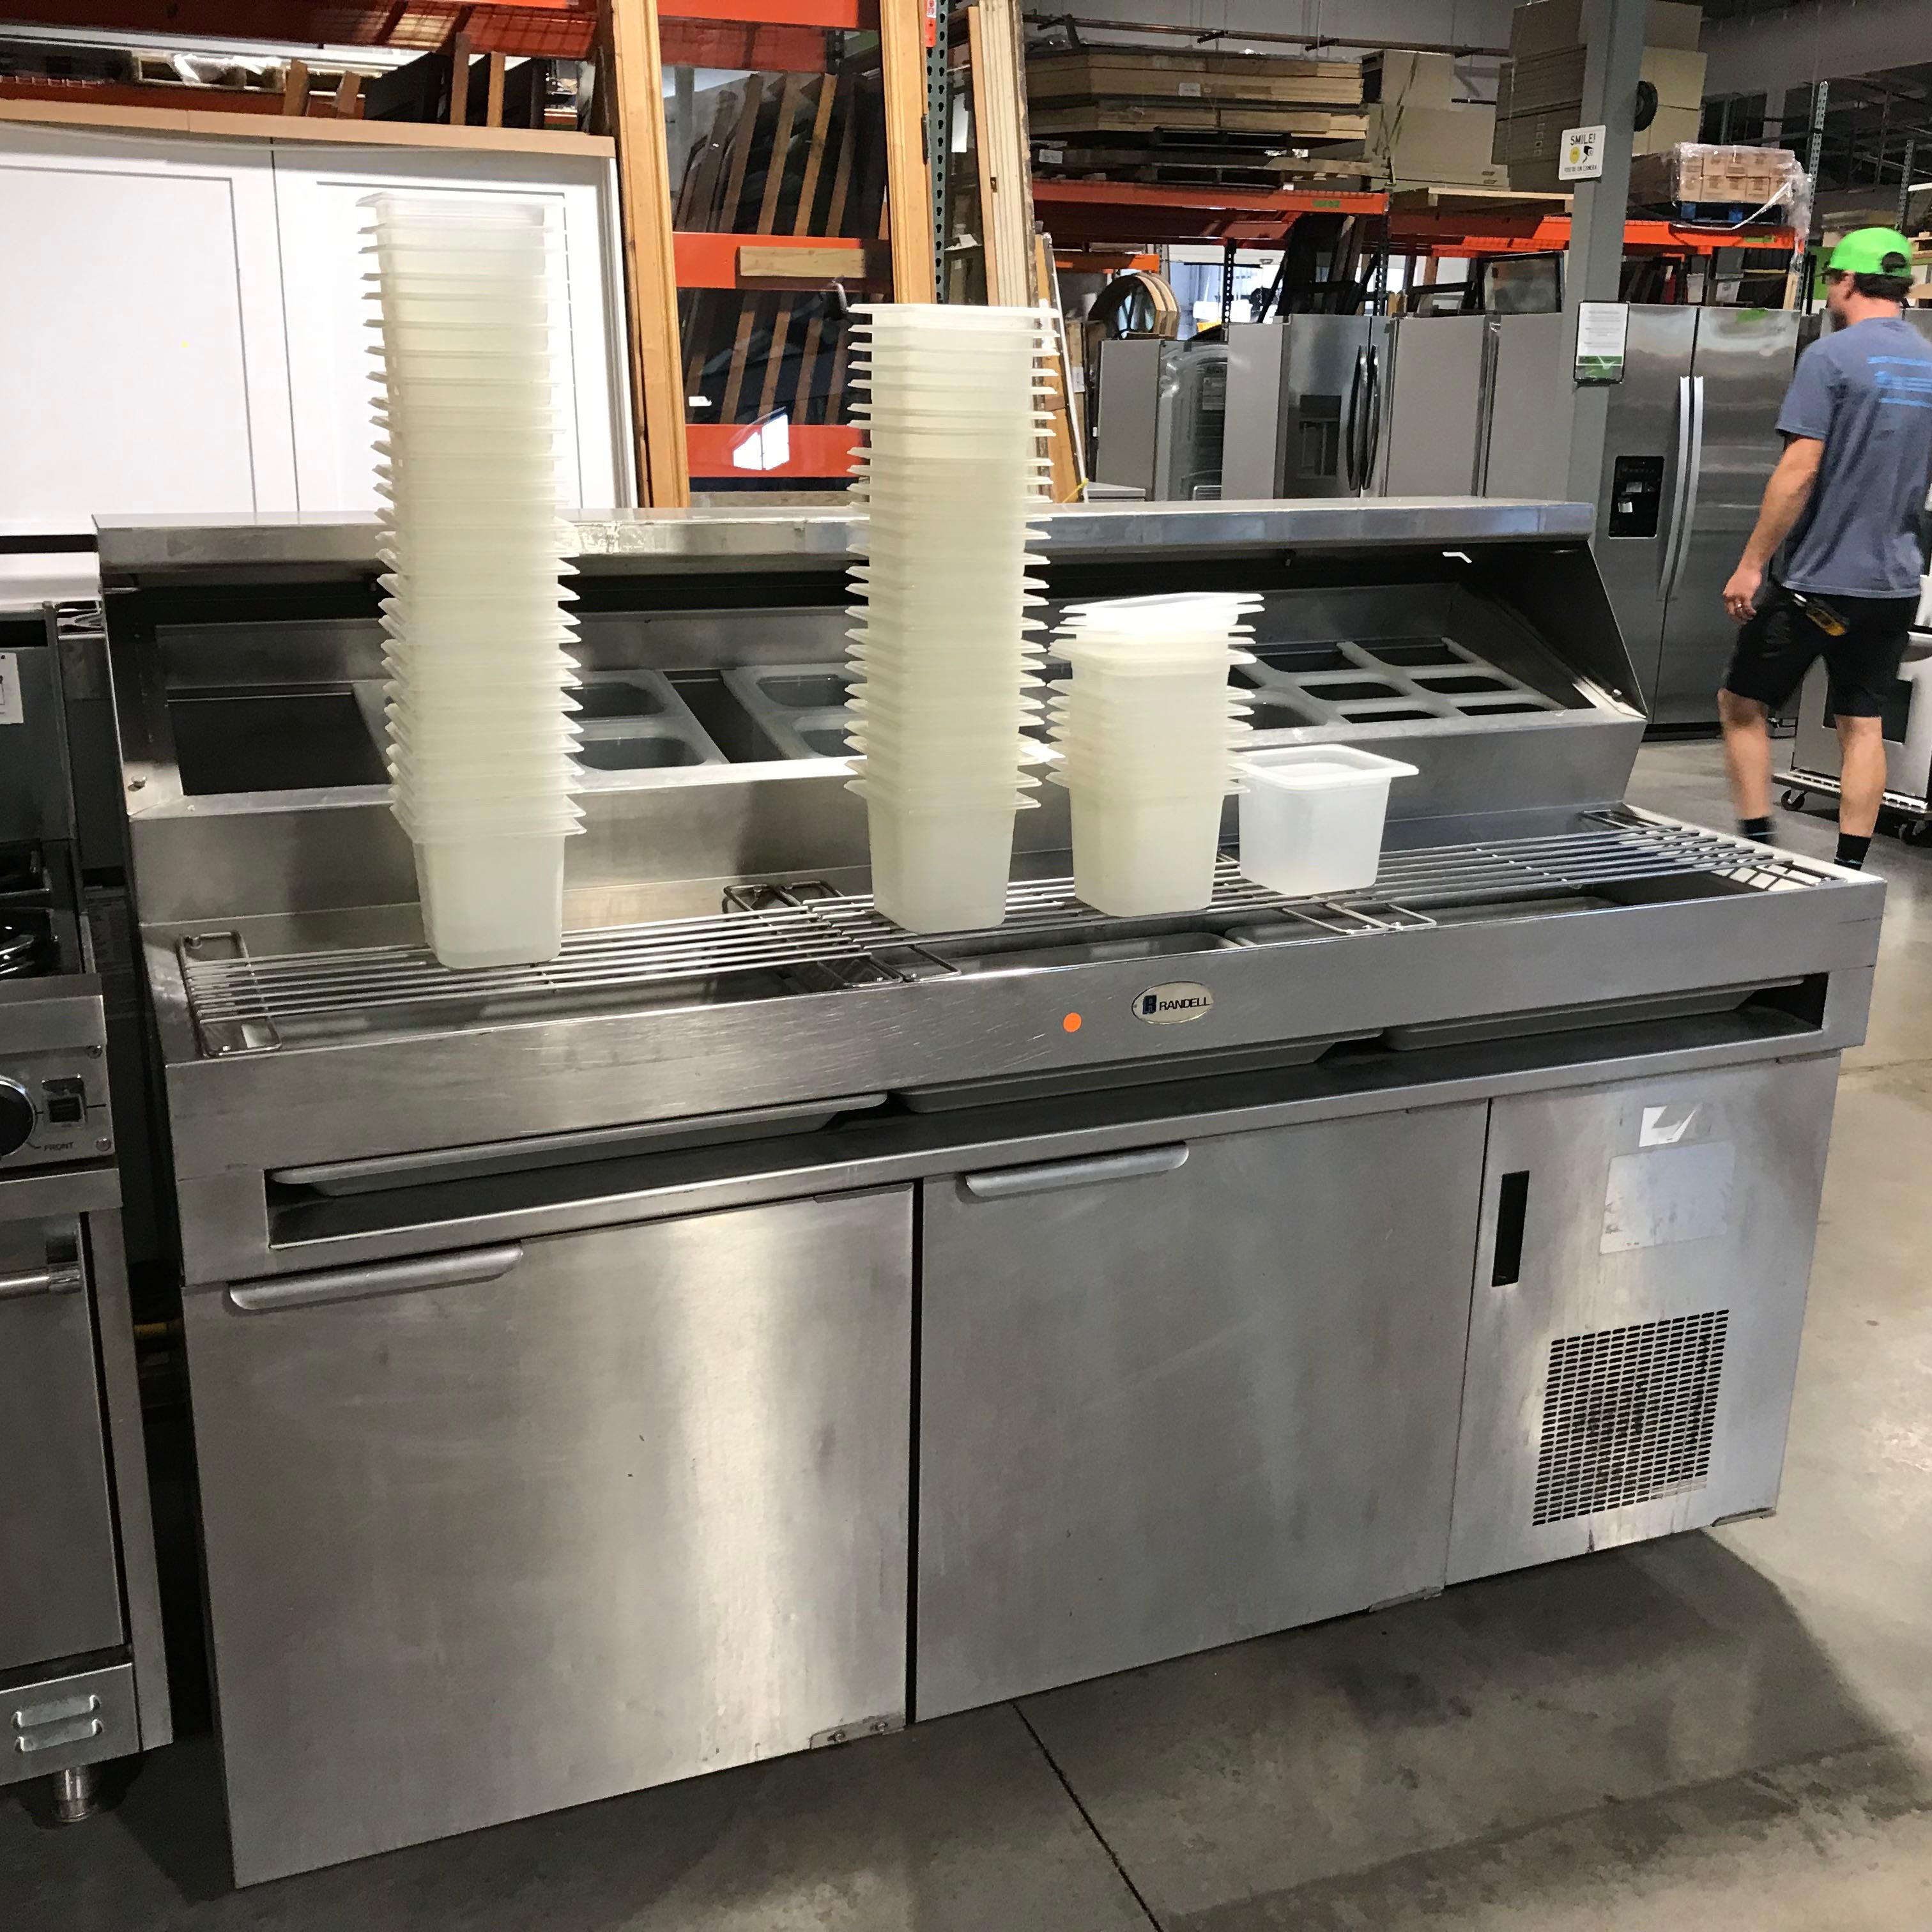 74"x 34"x 52" Randell Stainless Steel Refrigerated Prep Station